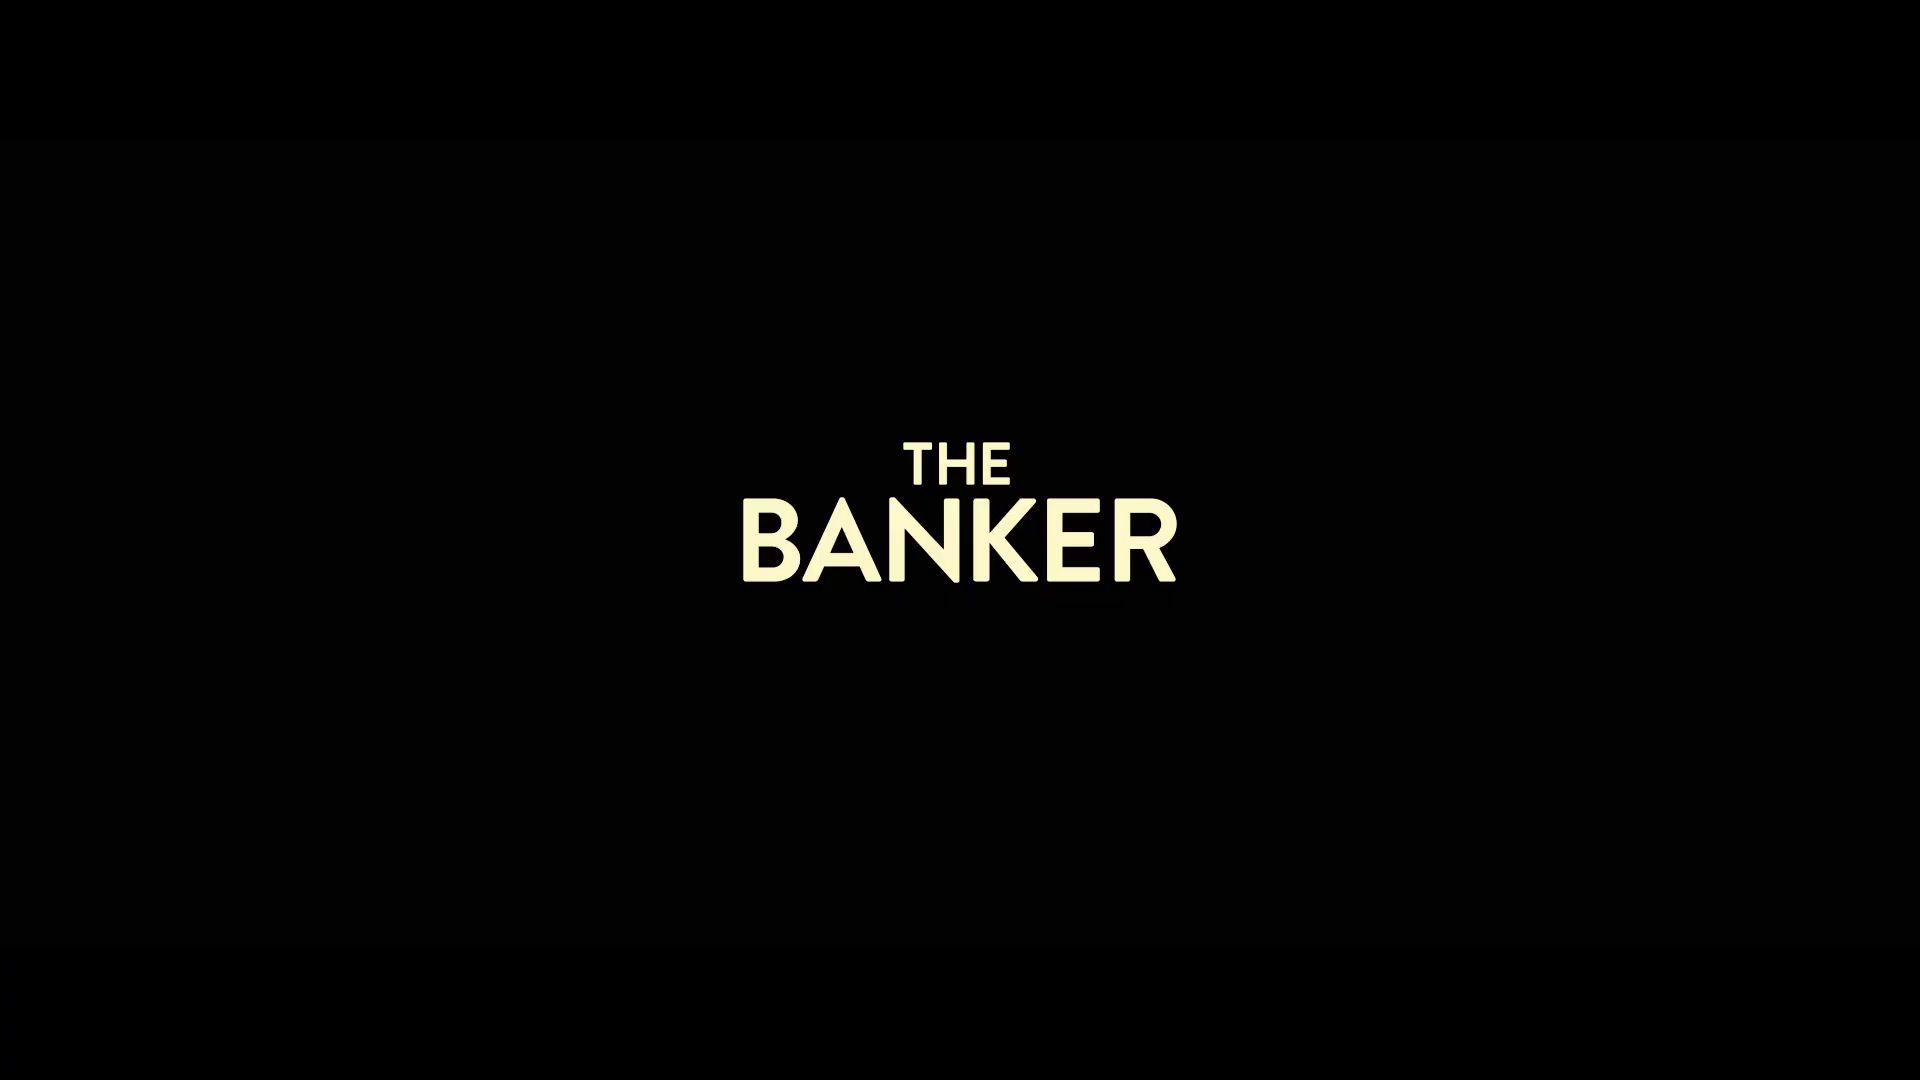 THE BANKER (2020) —